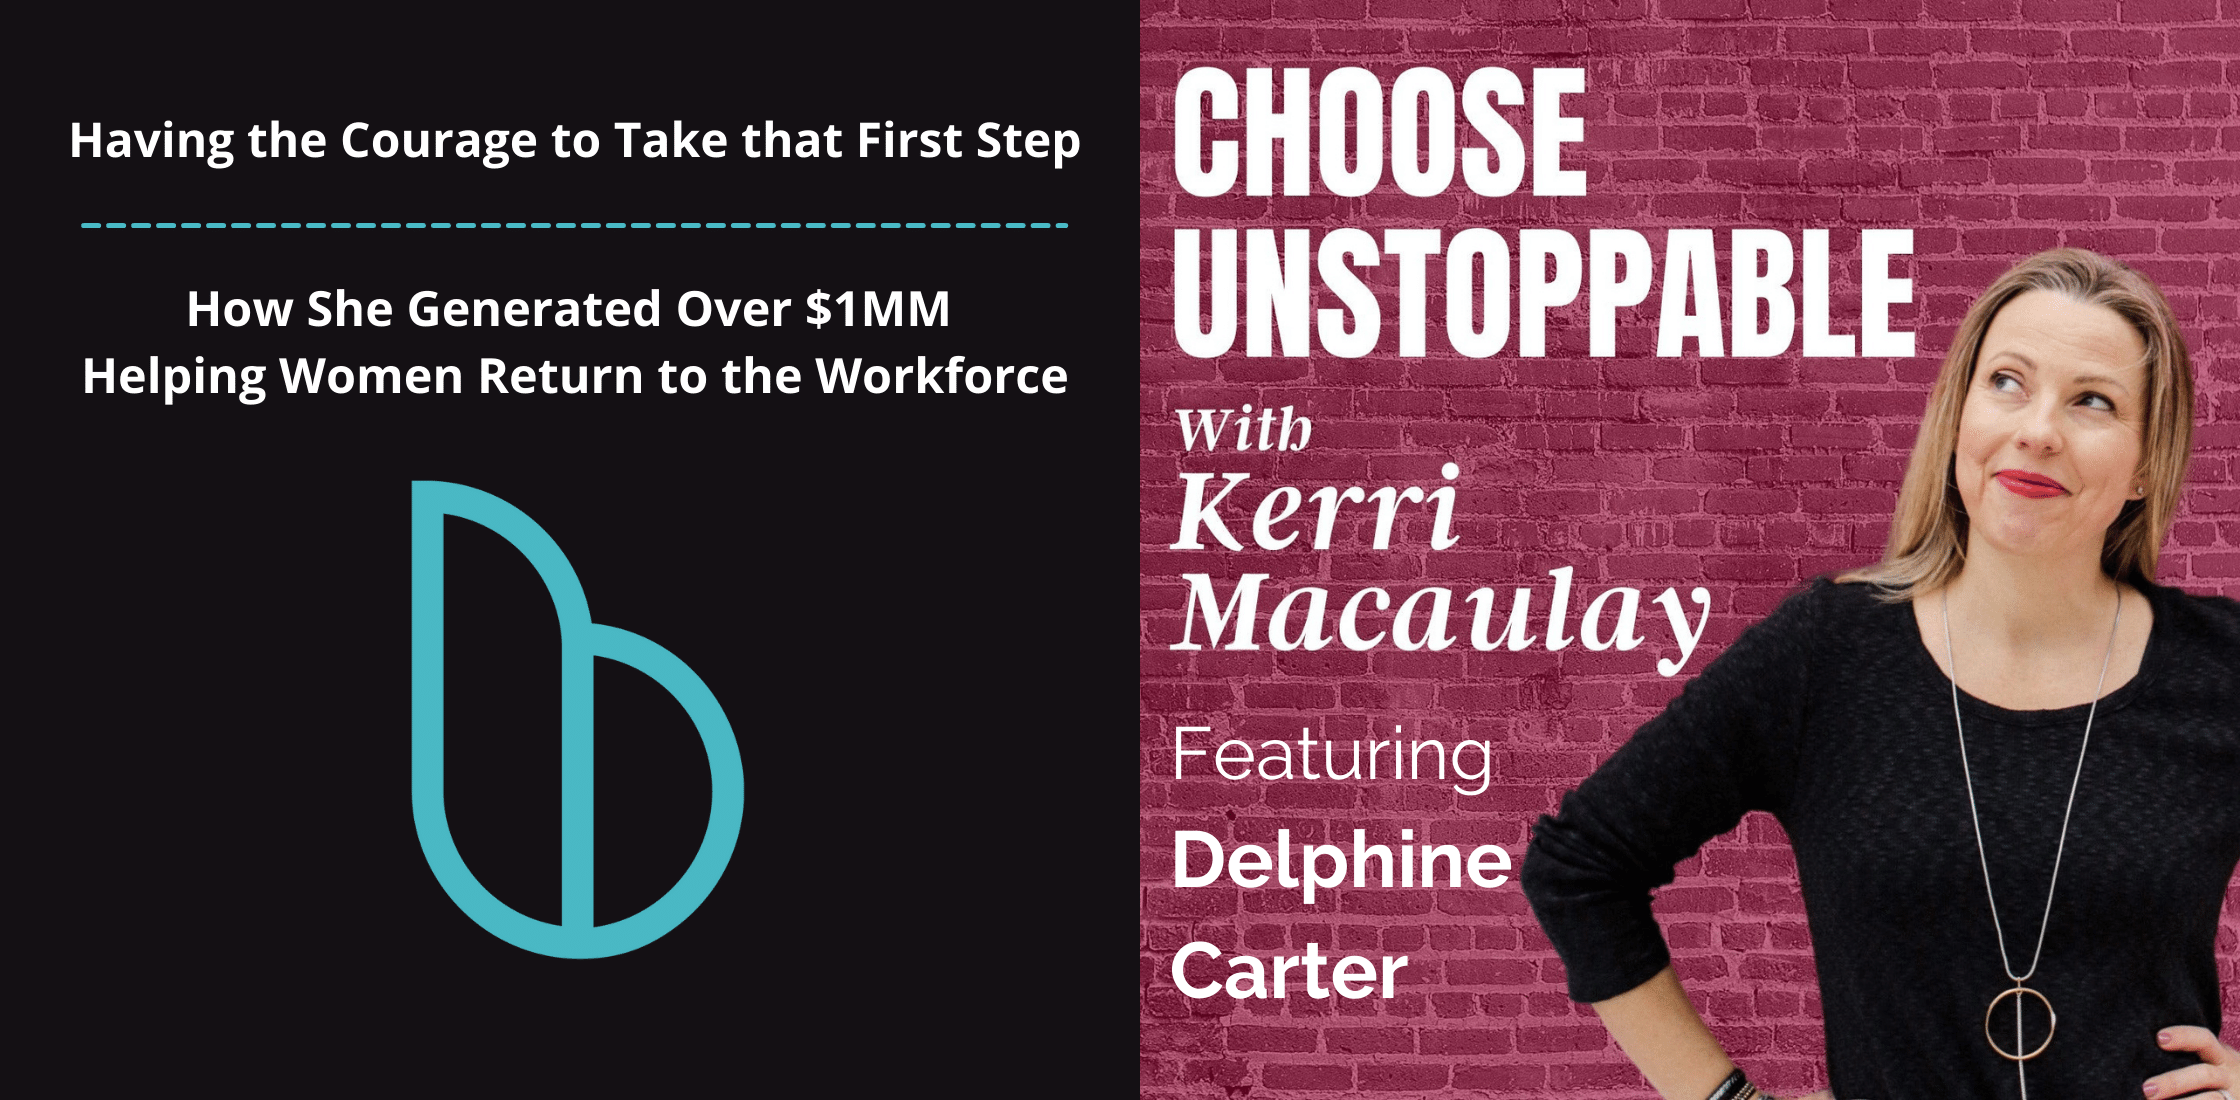 Choose Unstoppable Podcast with Delphine Carter Having the Courage to take that first step; helping women return to the workforce